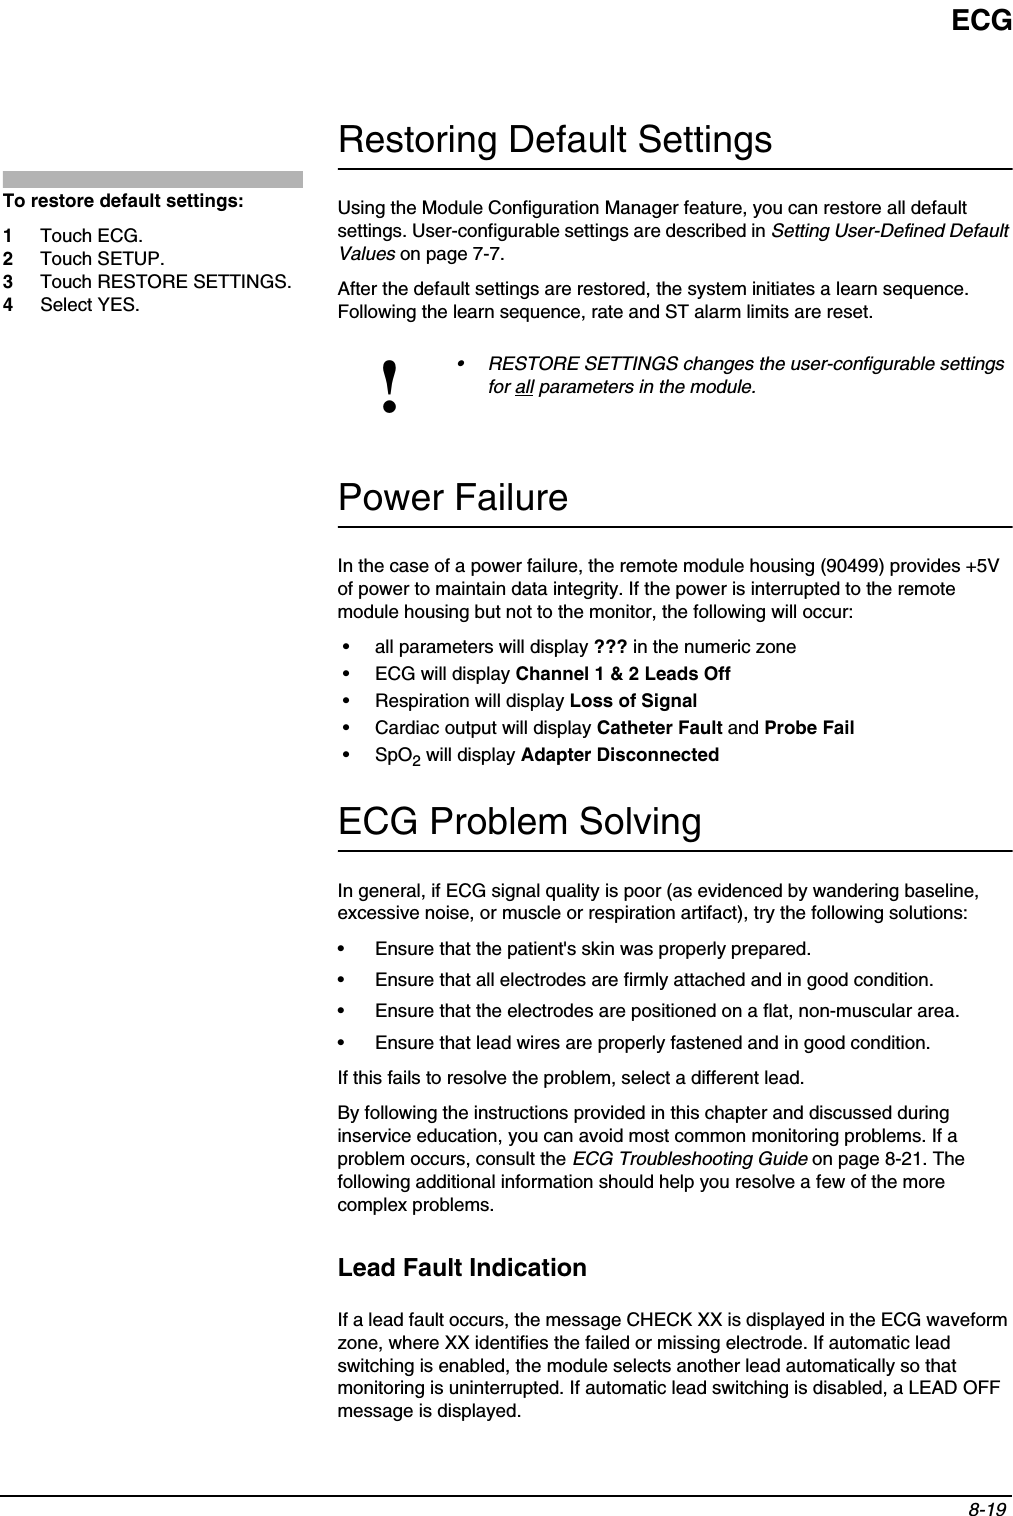 ECG8-19 Restoring Default SettingsUsing the Module Configuration Manager feature, you can restore all default settings. User-configurable settings are described in Setting User-Defined Default Values on page 7-7.After the default settings are restored, the system initiates a learn sequence. Following the learn sequence, rate and ST alarm limits are reset.Power FailureIn the case of a power failure, the remote module housing (90499) provides +5V of power to maintain data integrity. If the power is interrupted to the remote module housing but not to the monitor, the following will occur:• all parameters will display ??? in the numeric zone• ECG will display Channel 1 &amp; 2 Leads Off• Respiration will display Loss of Signal• Cardiac output will display Catheter Fault and Probe Fail•SpO2 will display Adapter DisconnectedECG Problem SolvingIn general, if ECG signal quality is poor (as evidenced by wandering baseline, excessive noise, or muscle or respiration artifact), try the following solutions:• Ensure that the patient&apos;s skin was properly prepared.• Ensure that all electrodes are firmly attached and in good condition.• Ensure that the electrodes are positioned on a flat, non-muscular area.• Ensure that lead wires are properly fastened and in good condition.If this fails to resolve the problem, select a different lead.By following the instructions provided in this chapter and discussed during inservice education, you can avoid most common monitoring problems. If a problem occurs, consult the ECG Troubleshooting Guide on page 8-21. The following additional information should help you resolve a few of the more complex problems.Lead Fault IndicationIf a lead fault occurs, the message CHECK XX is displayed in the ECG waveform zone, where XX identifies the failed or missing electrode. If automatic lead switching is enabled, the module selects another lead automatically so that monitoring is uninterrupted. If automatic lead switching is disabled, a LEAD OFF message is displayed.!• RESTORE SETTINGS changes the user-configurable settings for all parameters in the module.To restore default settings:1Touch ECG.2Touch SETUP.3Touch RESTORE SETTINGS.4Select YES.